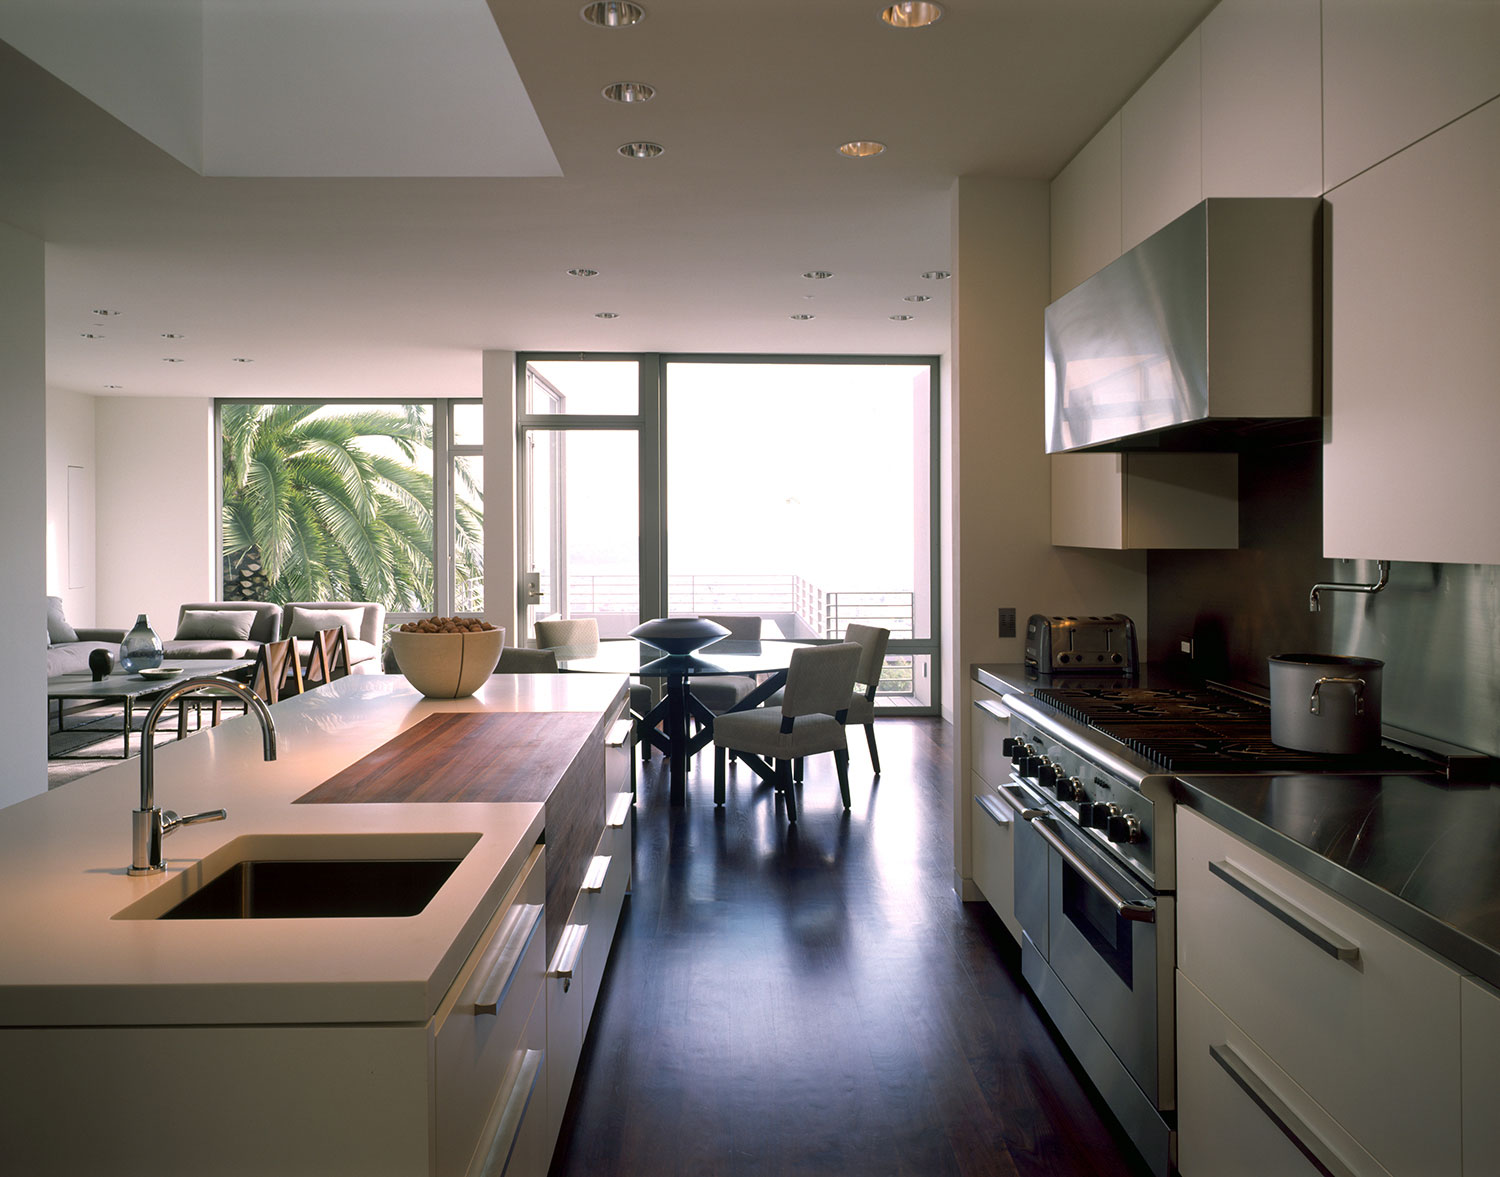  Location: San Francisco, California  Project Type: Residential Remodel 